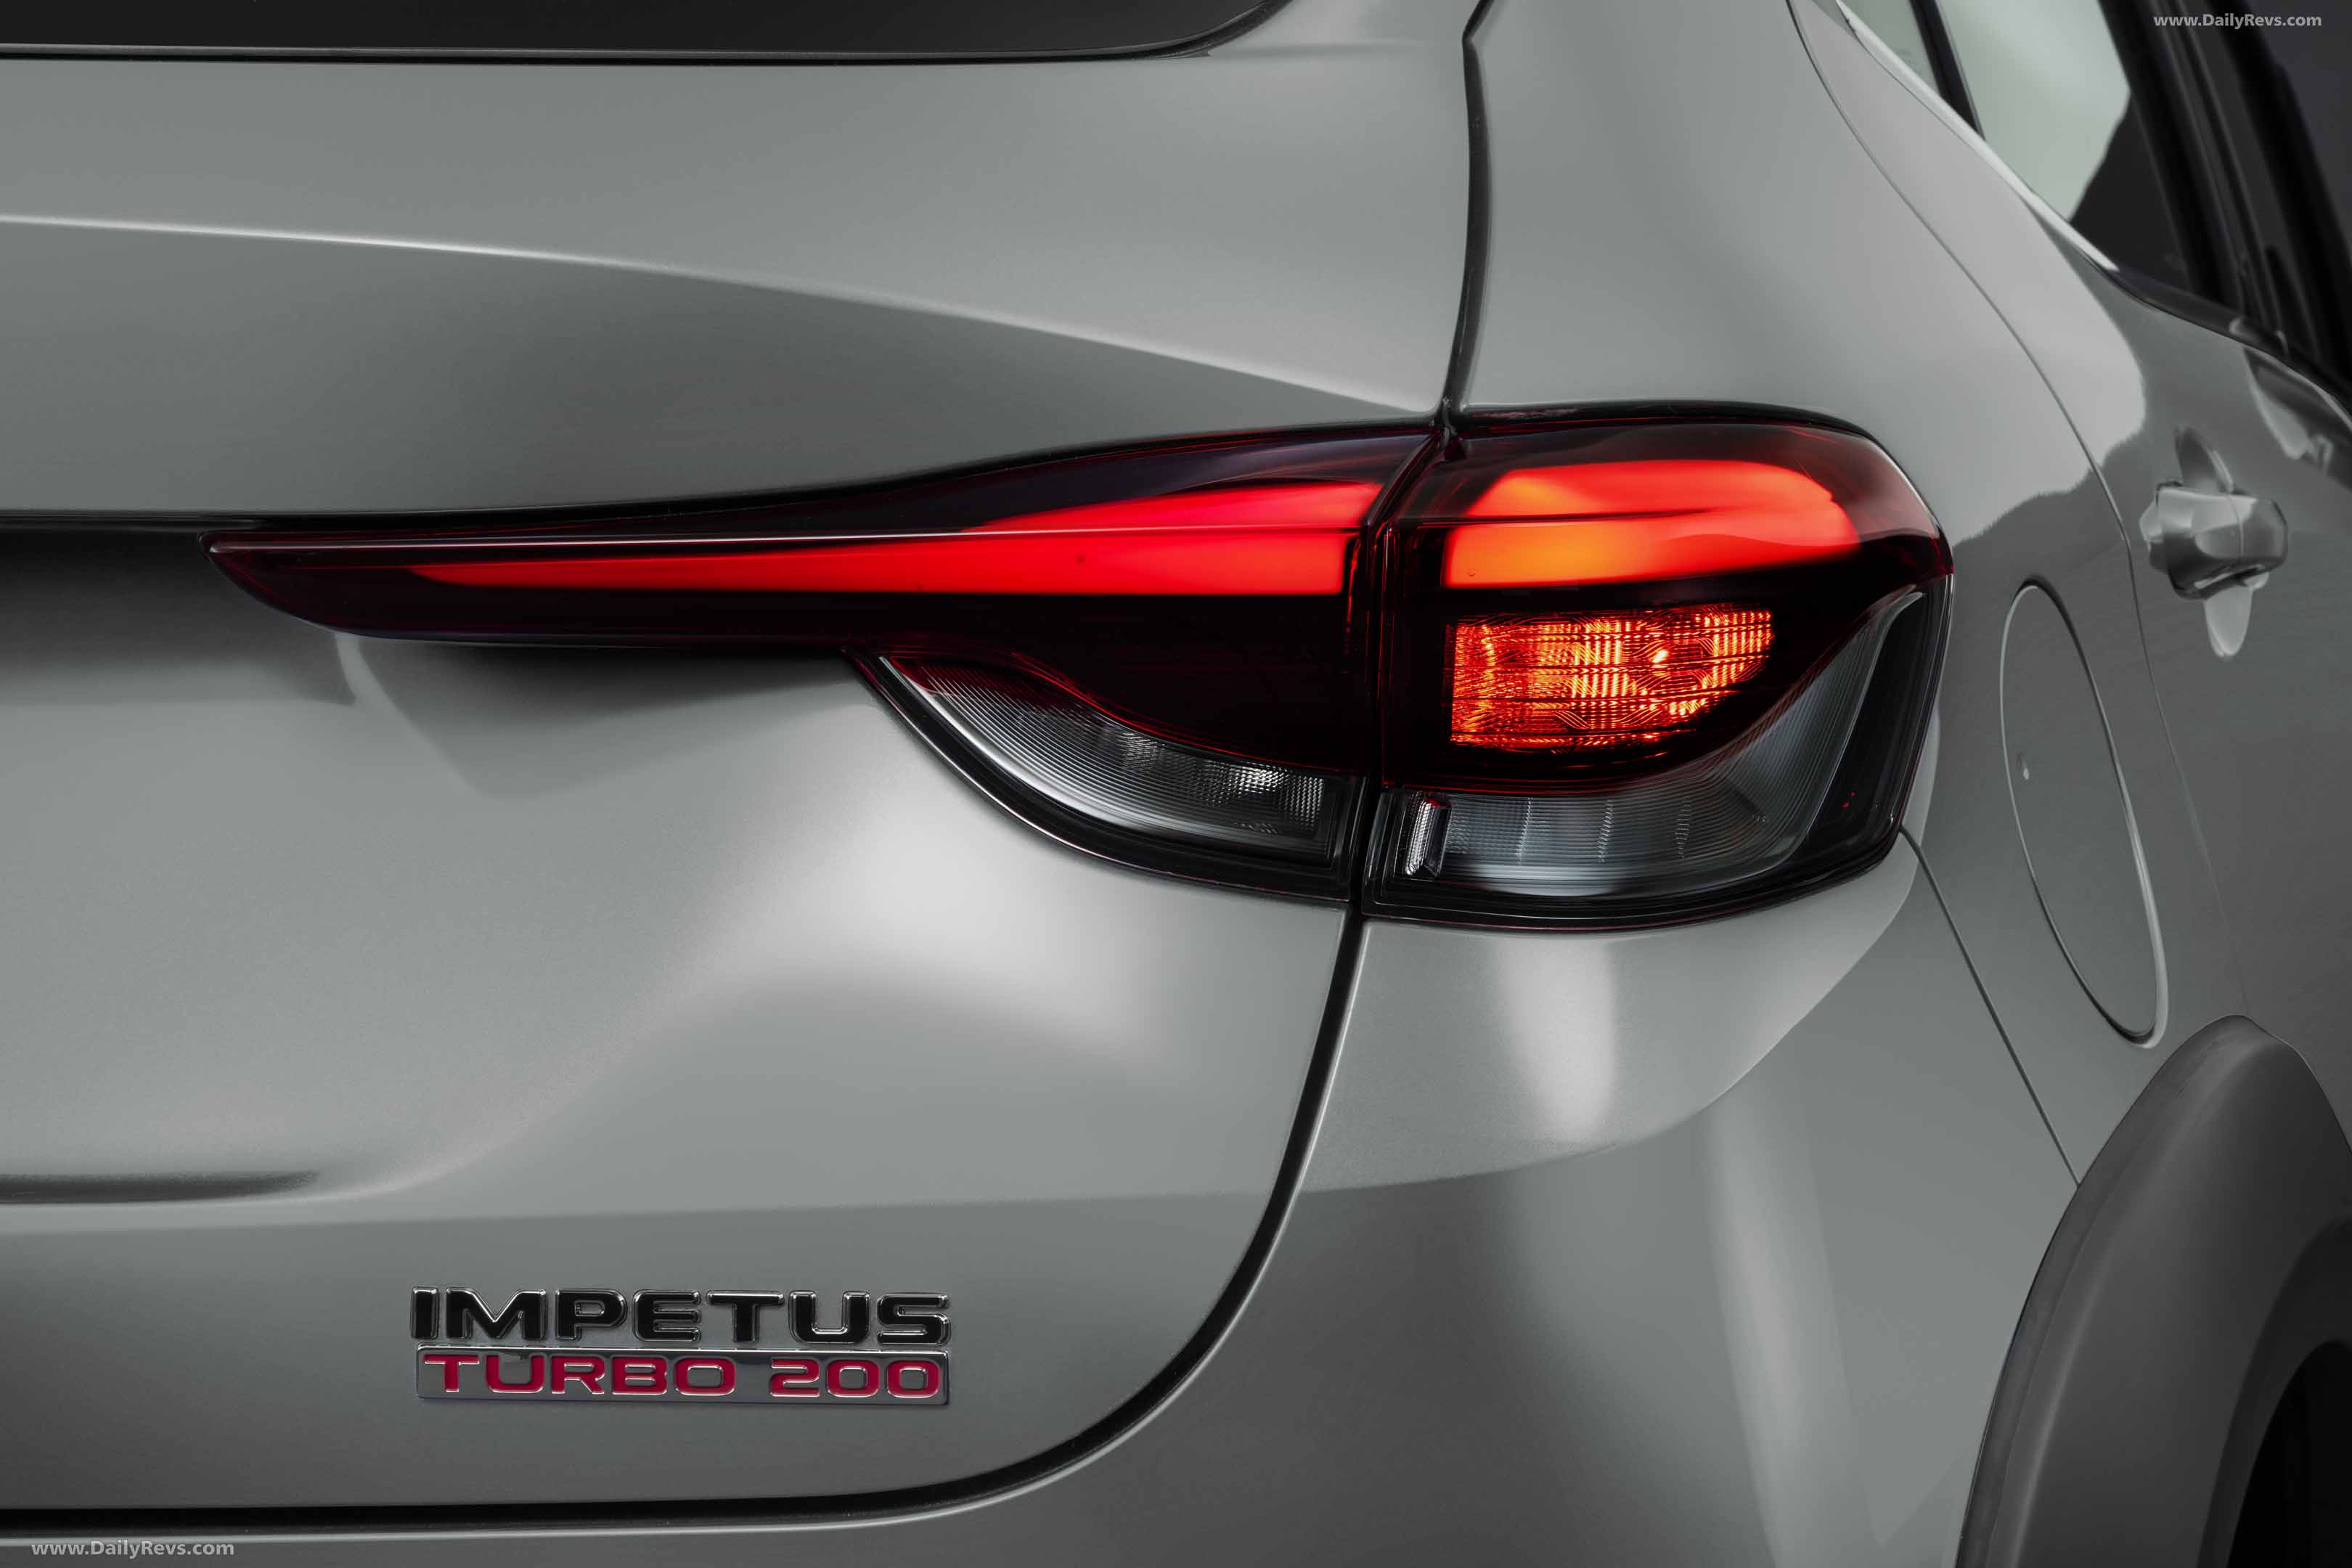 Fiat Pulse Impetus Turbo 200 Wallpapers